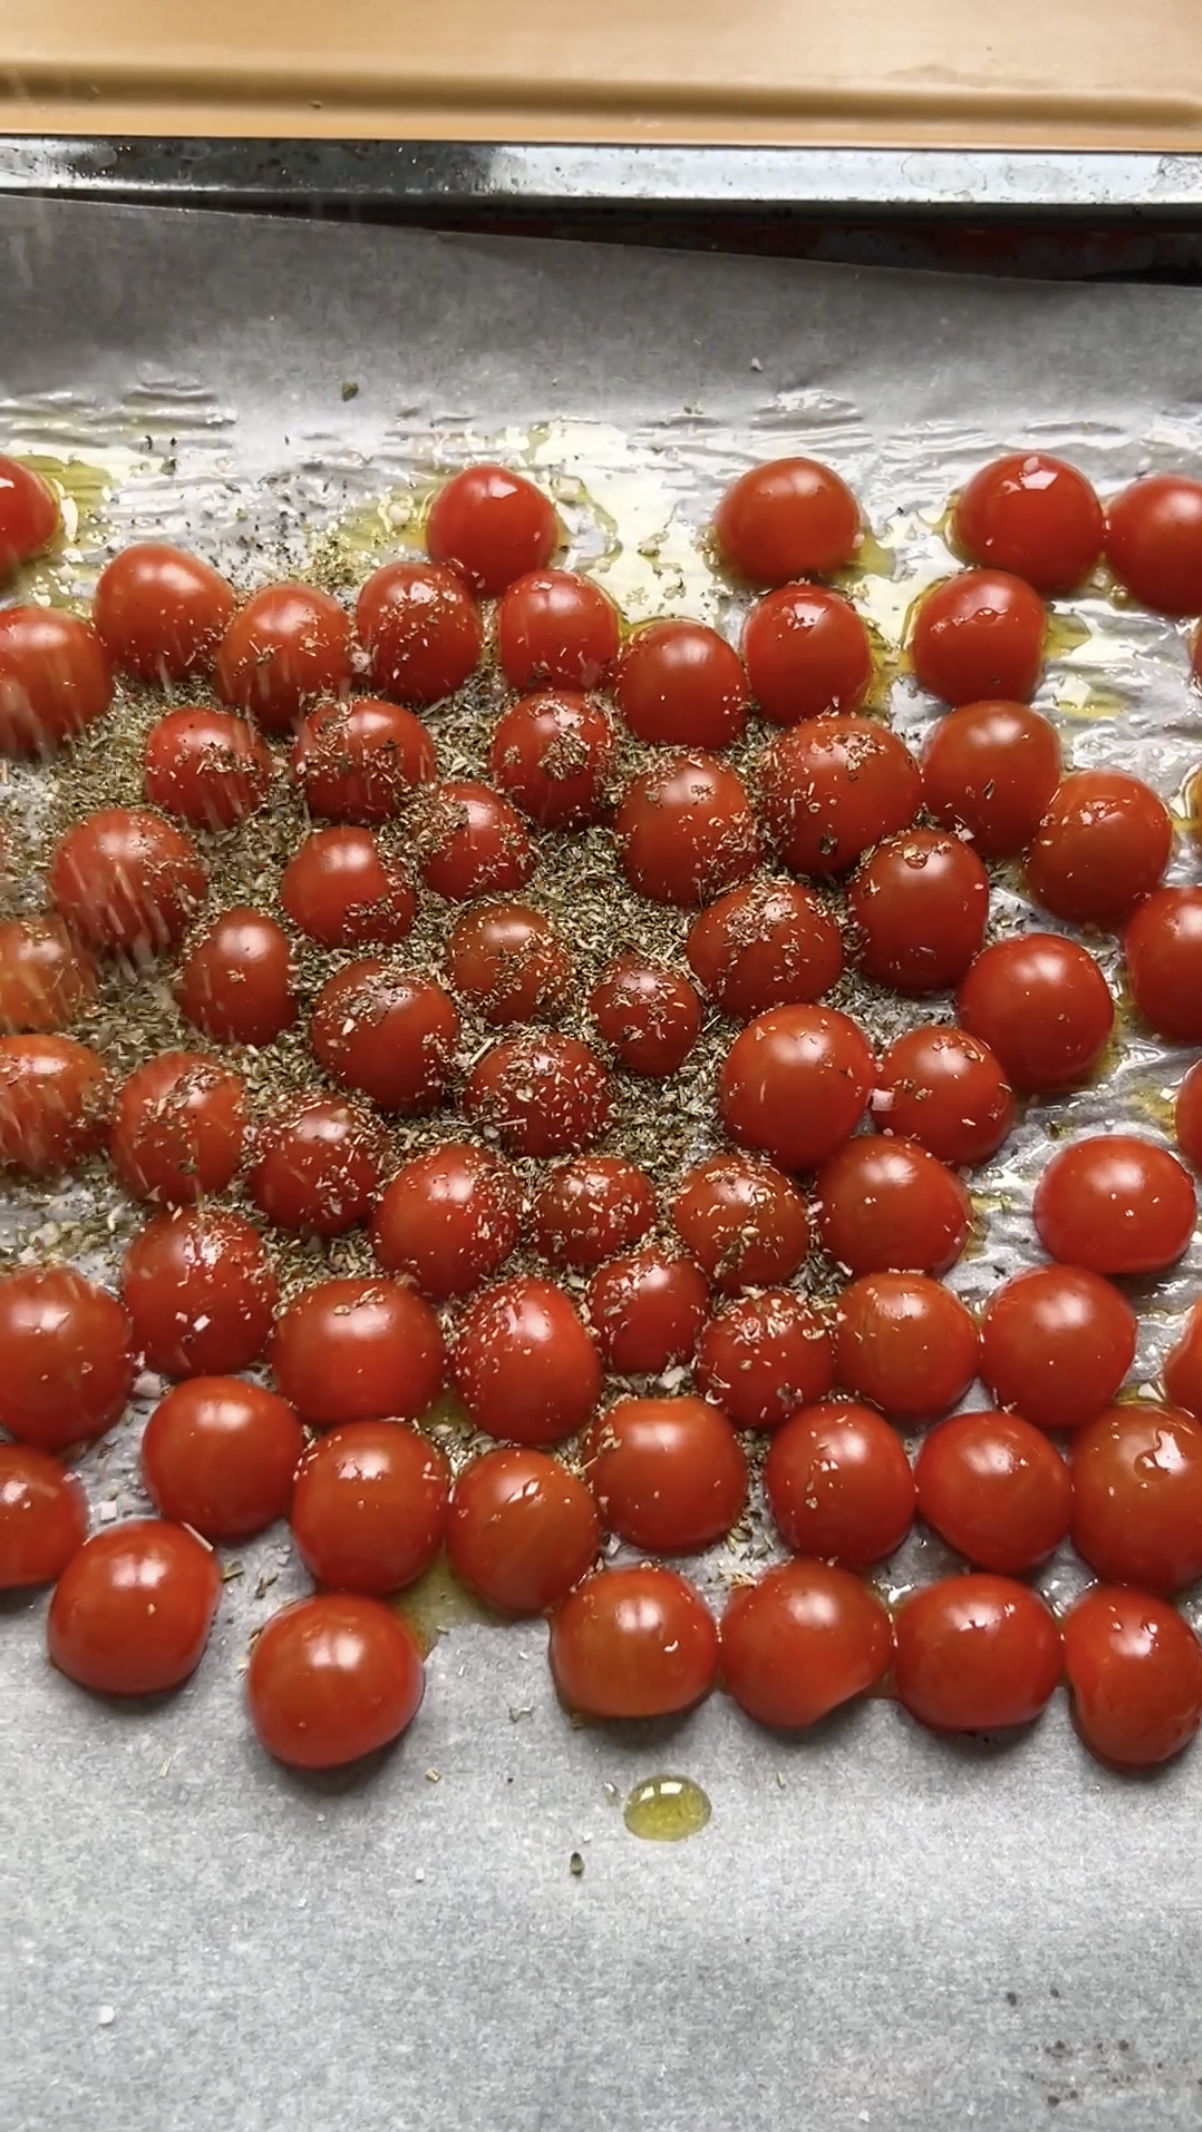 Cherry tomatoes, halved and placed on a sheet of baking paper, with olive oil and oregano.